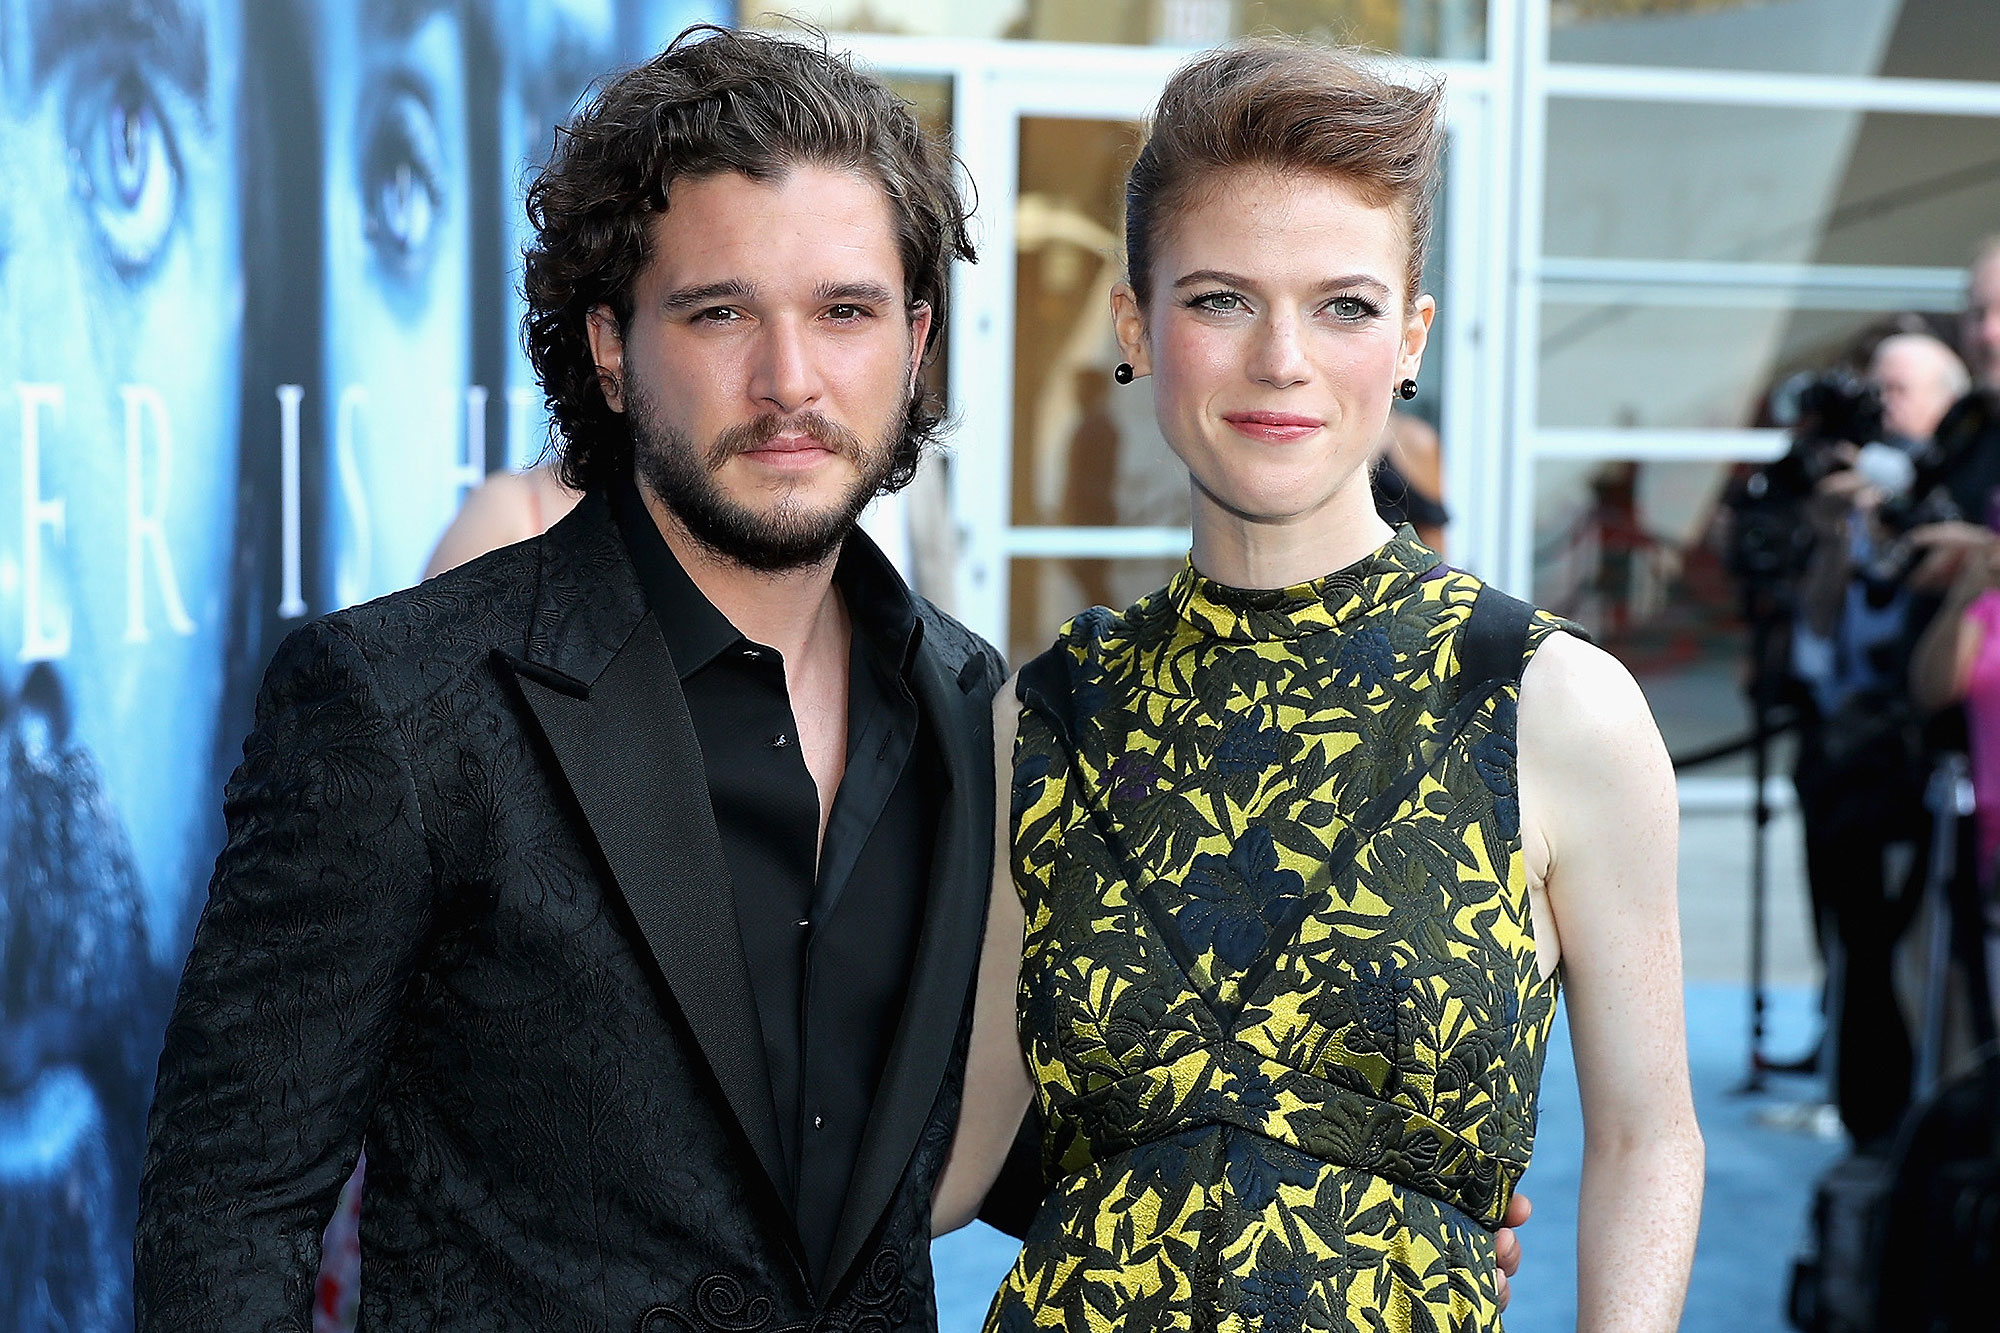 LOS ANGELES, CA - JULY 12: Actors Kit Harington and Rose Leslie attend the premiere of HBO's "Game Of Thrones" season 7 at Walt Disney Concert Hall on July 12, 2017 in Los Angeles, California. (Photo by Neilson Barnard/Getty Images)